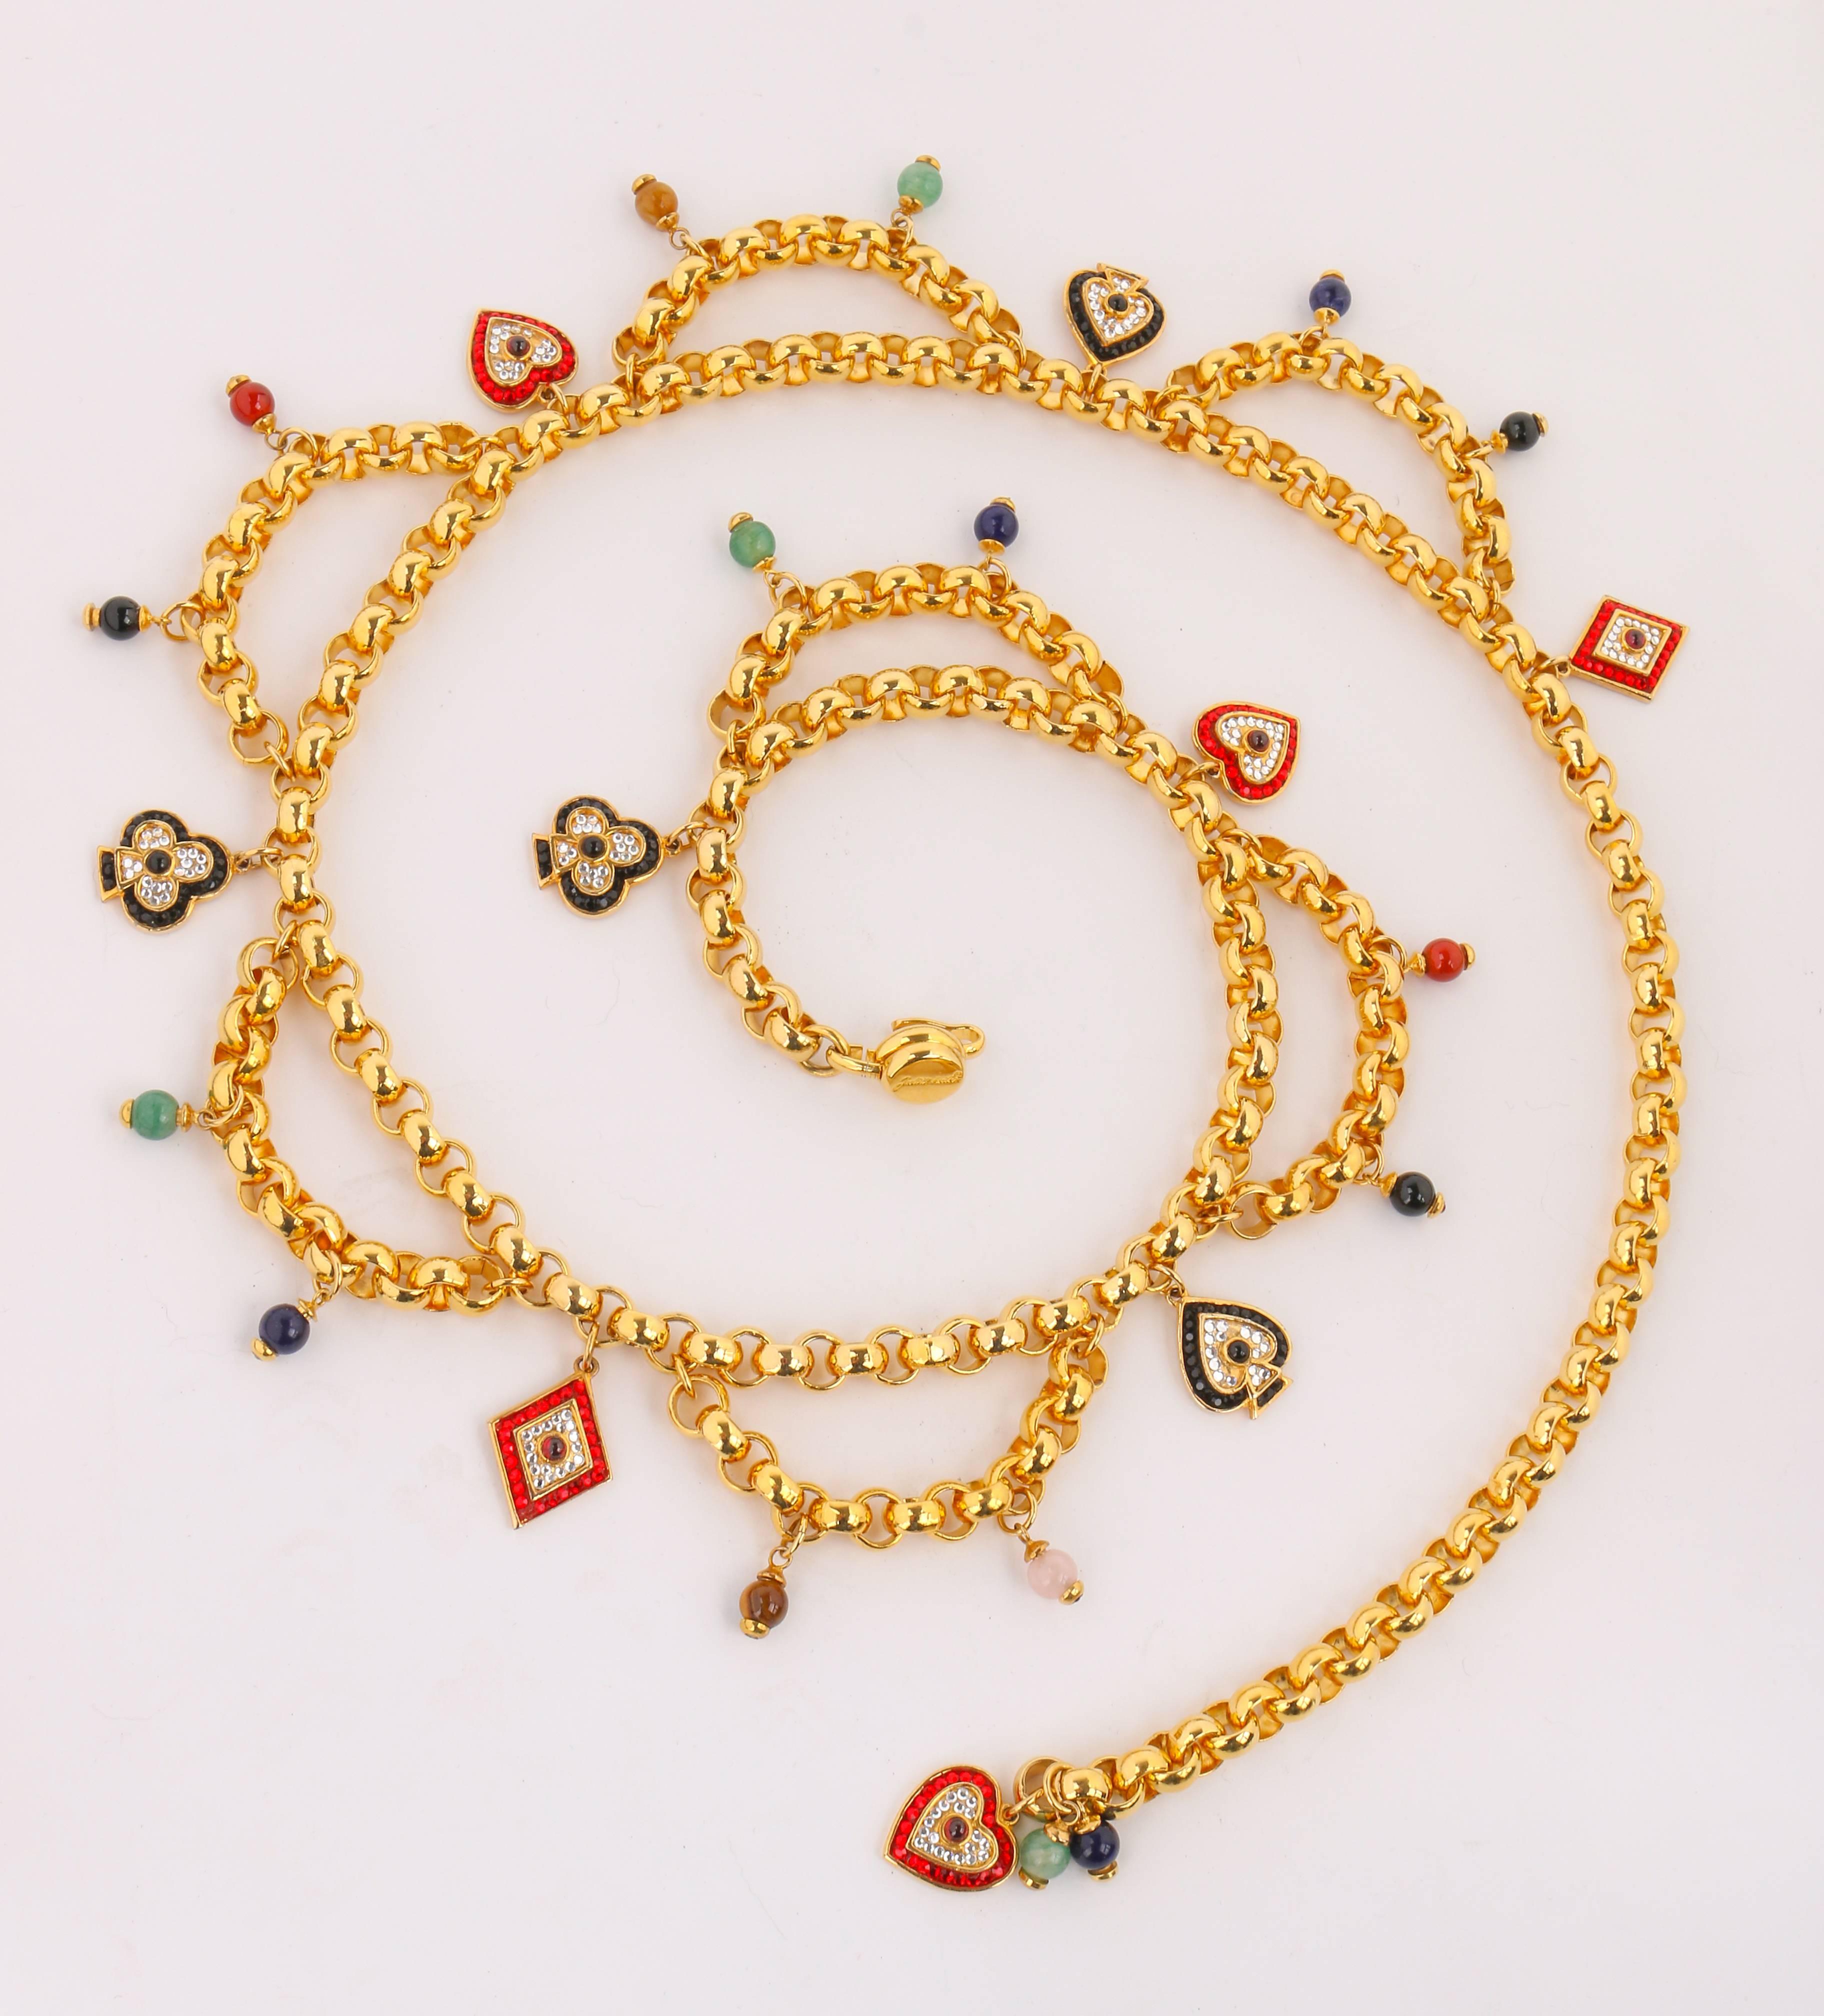 Judith Leiber gold-toned card suit charm chain belt. Gold-toned rolo chain with  rhinestone embellished heart, club, diamond, and spade charms. Draped chain sections with round multicolor stone bead charms. J hook clasp for adjustable fit. Marked: